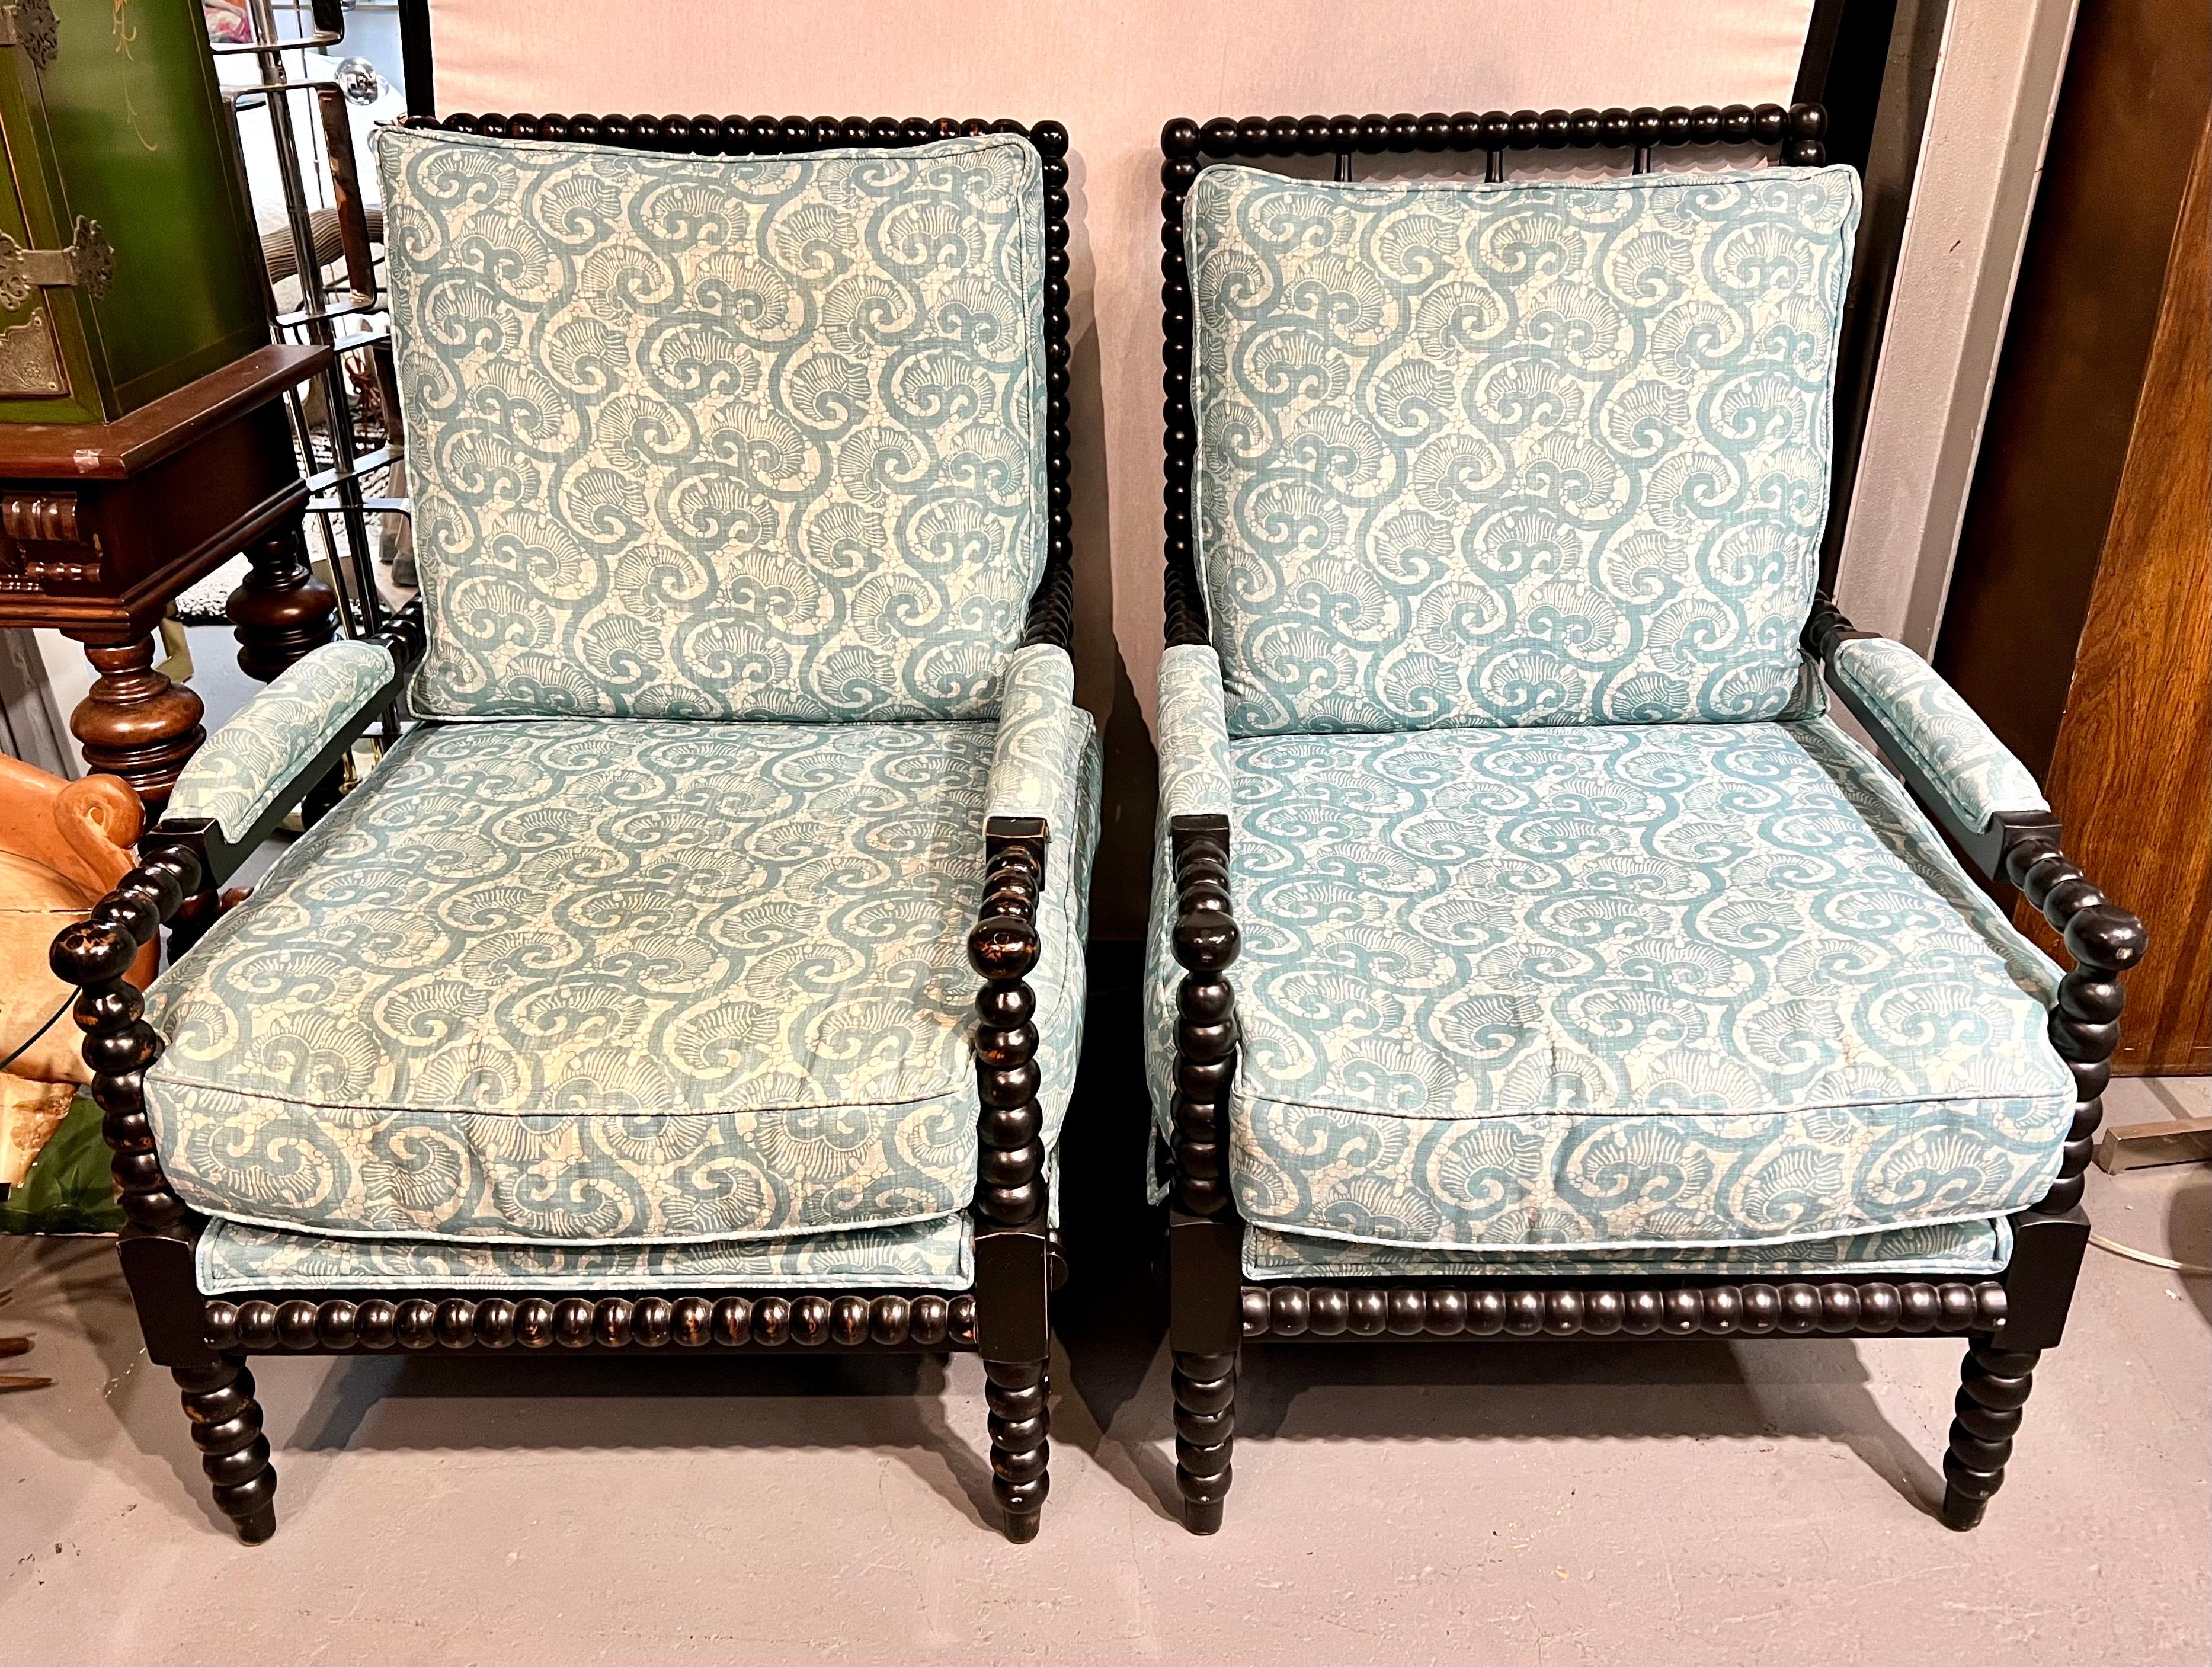 Magnificent pair of spool arm chairs with the same turned wood detail of 17th century bobbin furniture. Has turquoise paisley print upholstery which is not original to the set but rather done about 5 years ago. Coveted barley twist carved wood